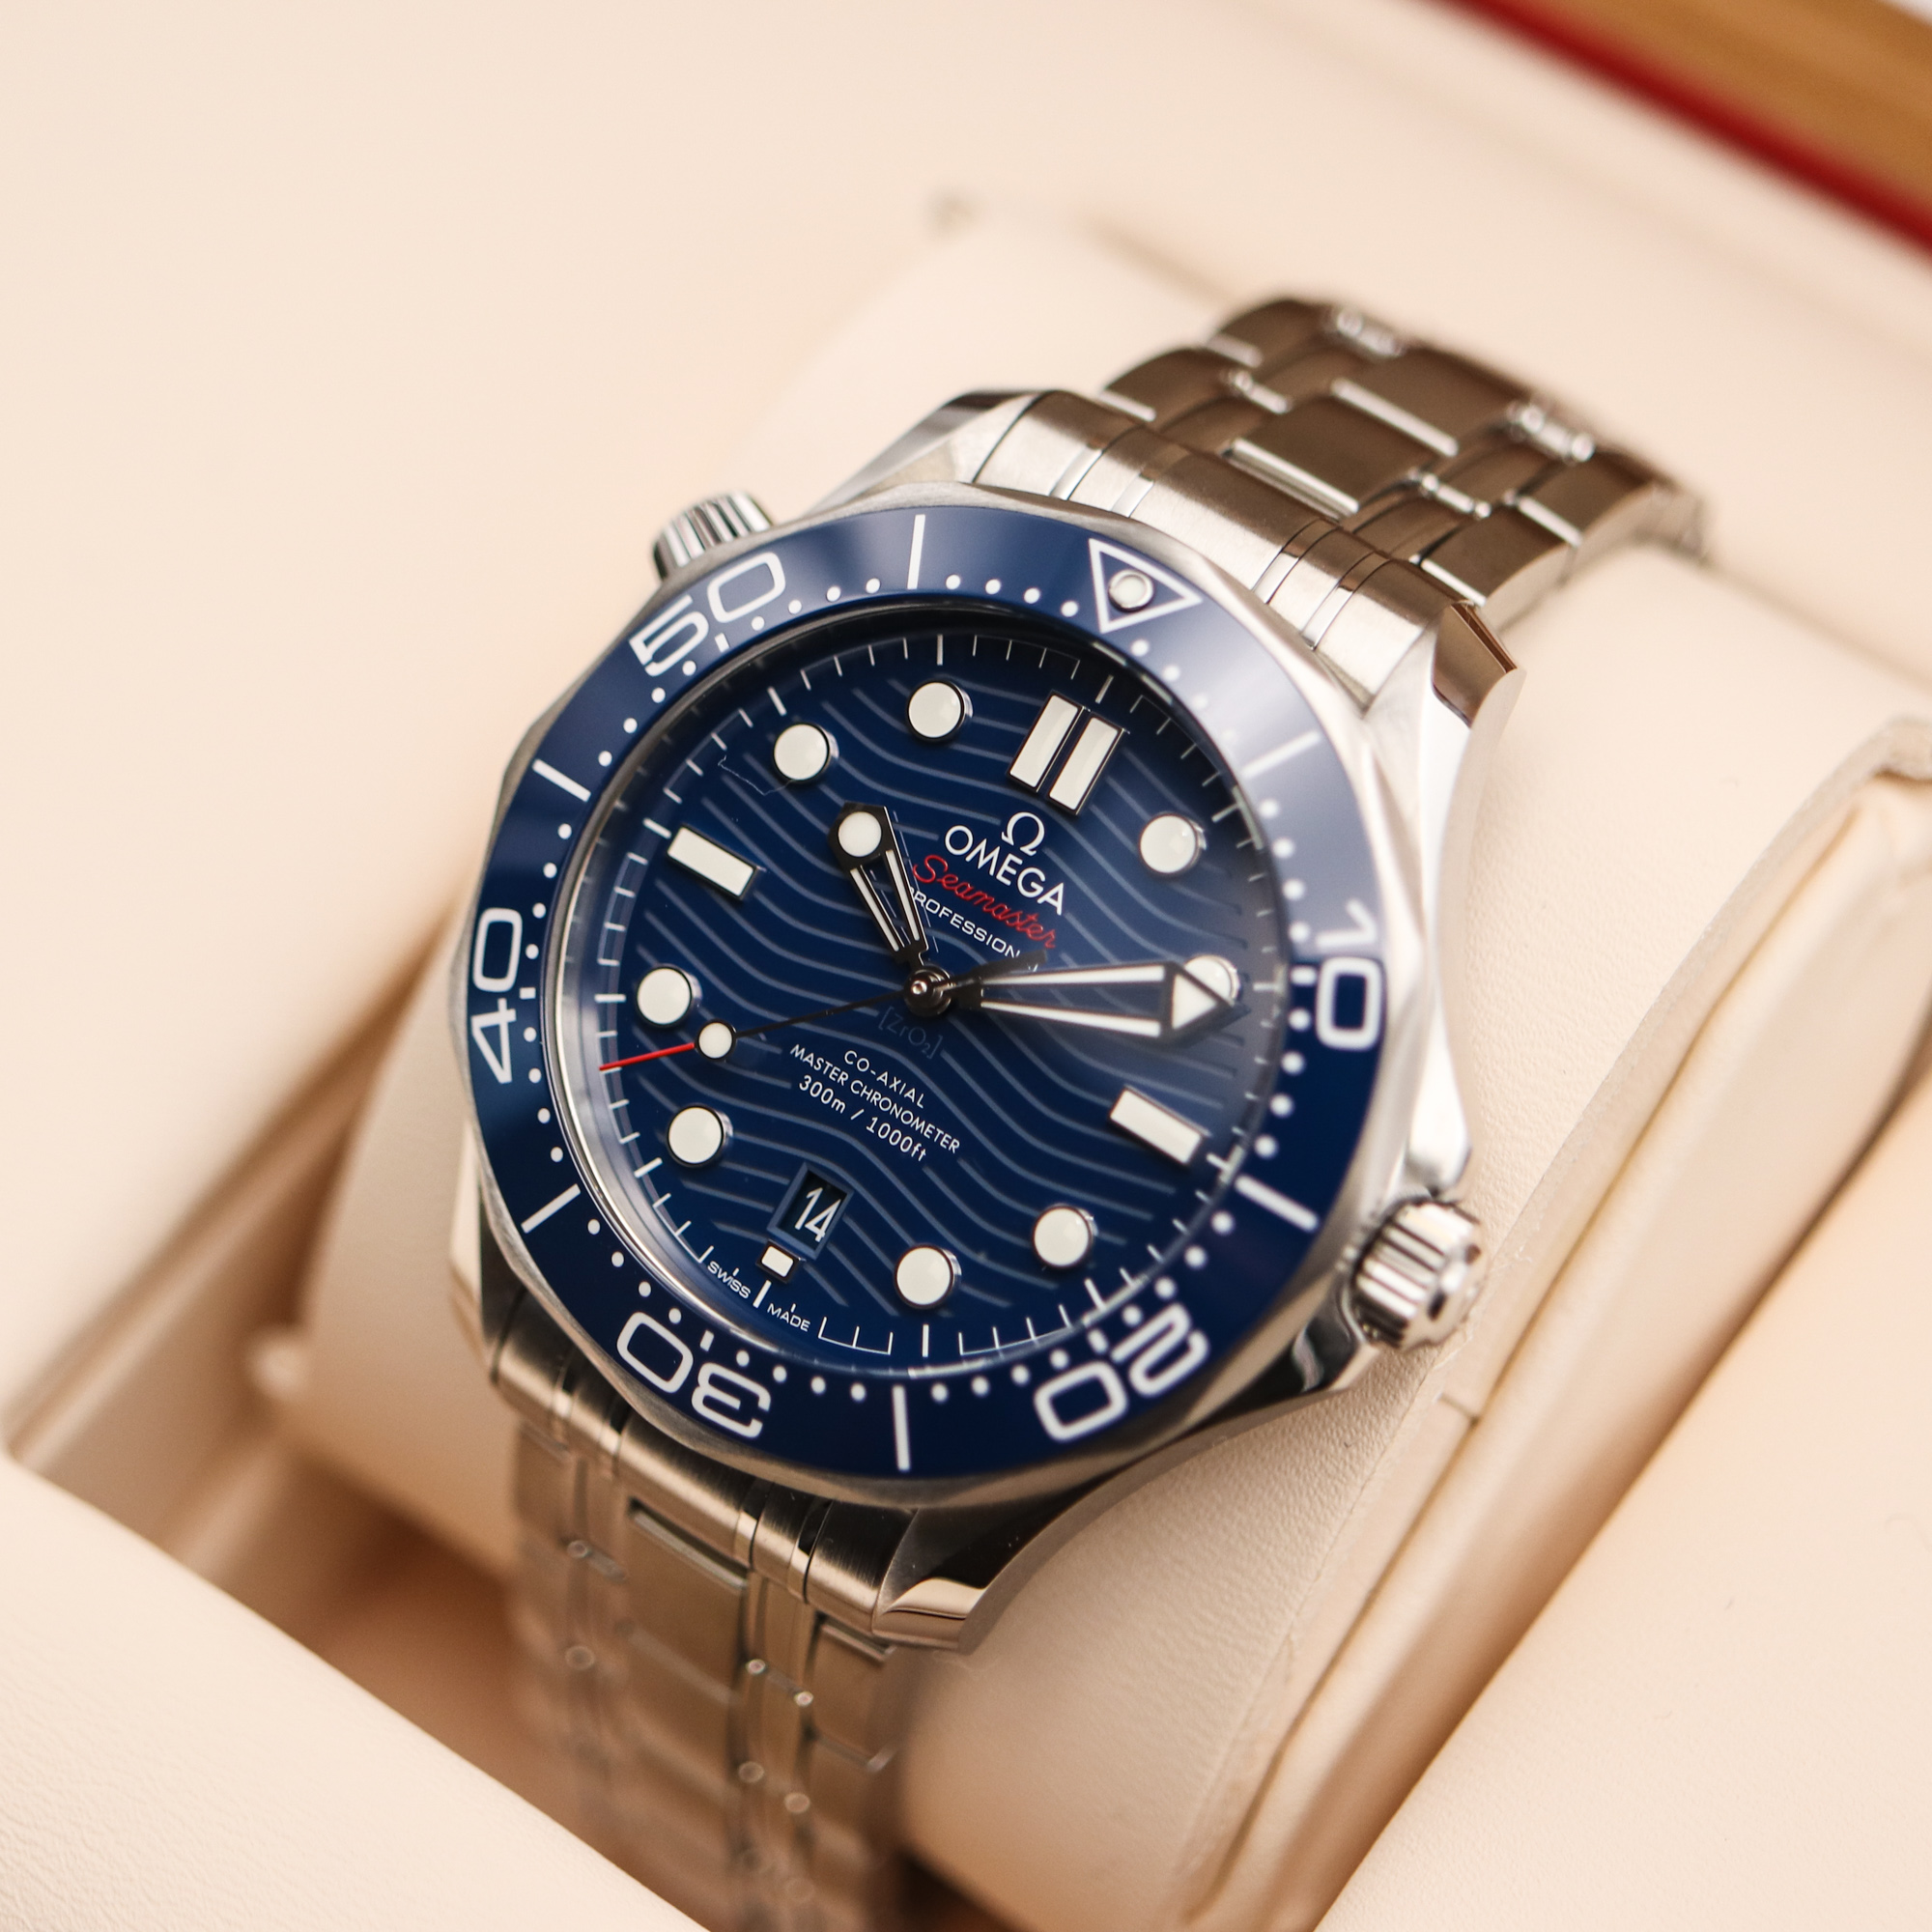 Omega Seamaster Diver 300M Co-Axial Master Chronometer